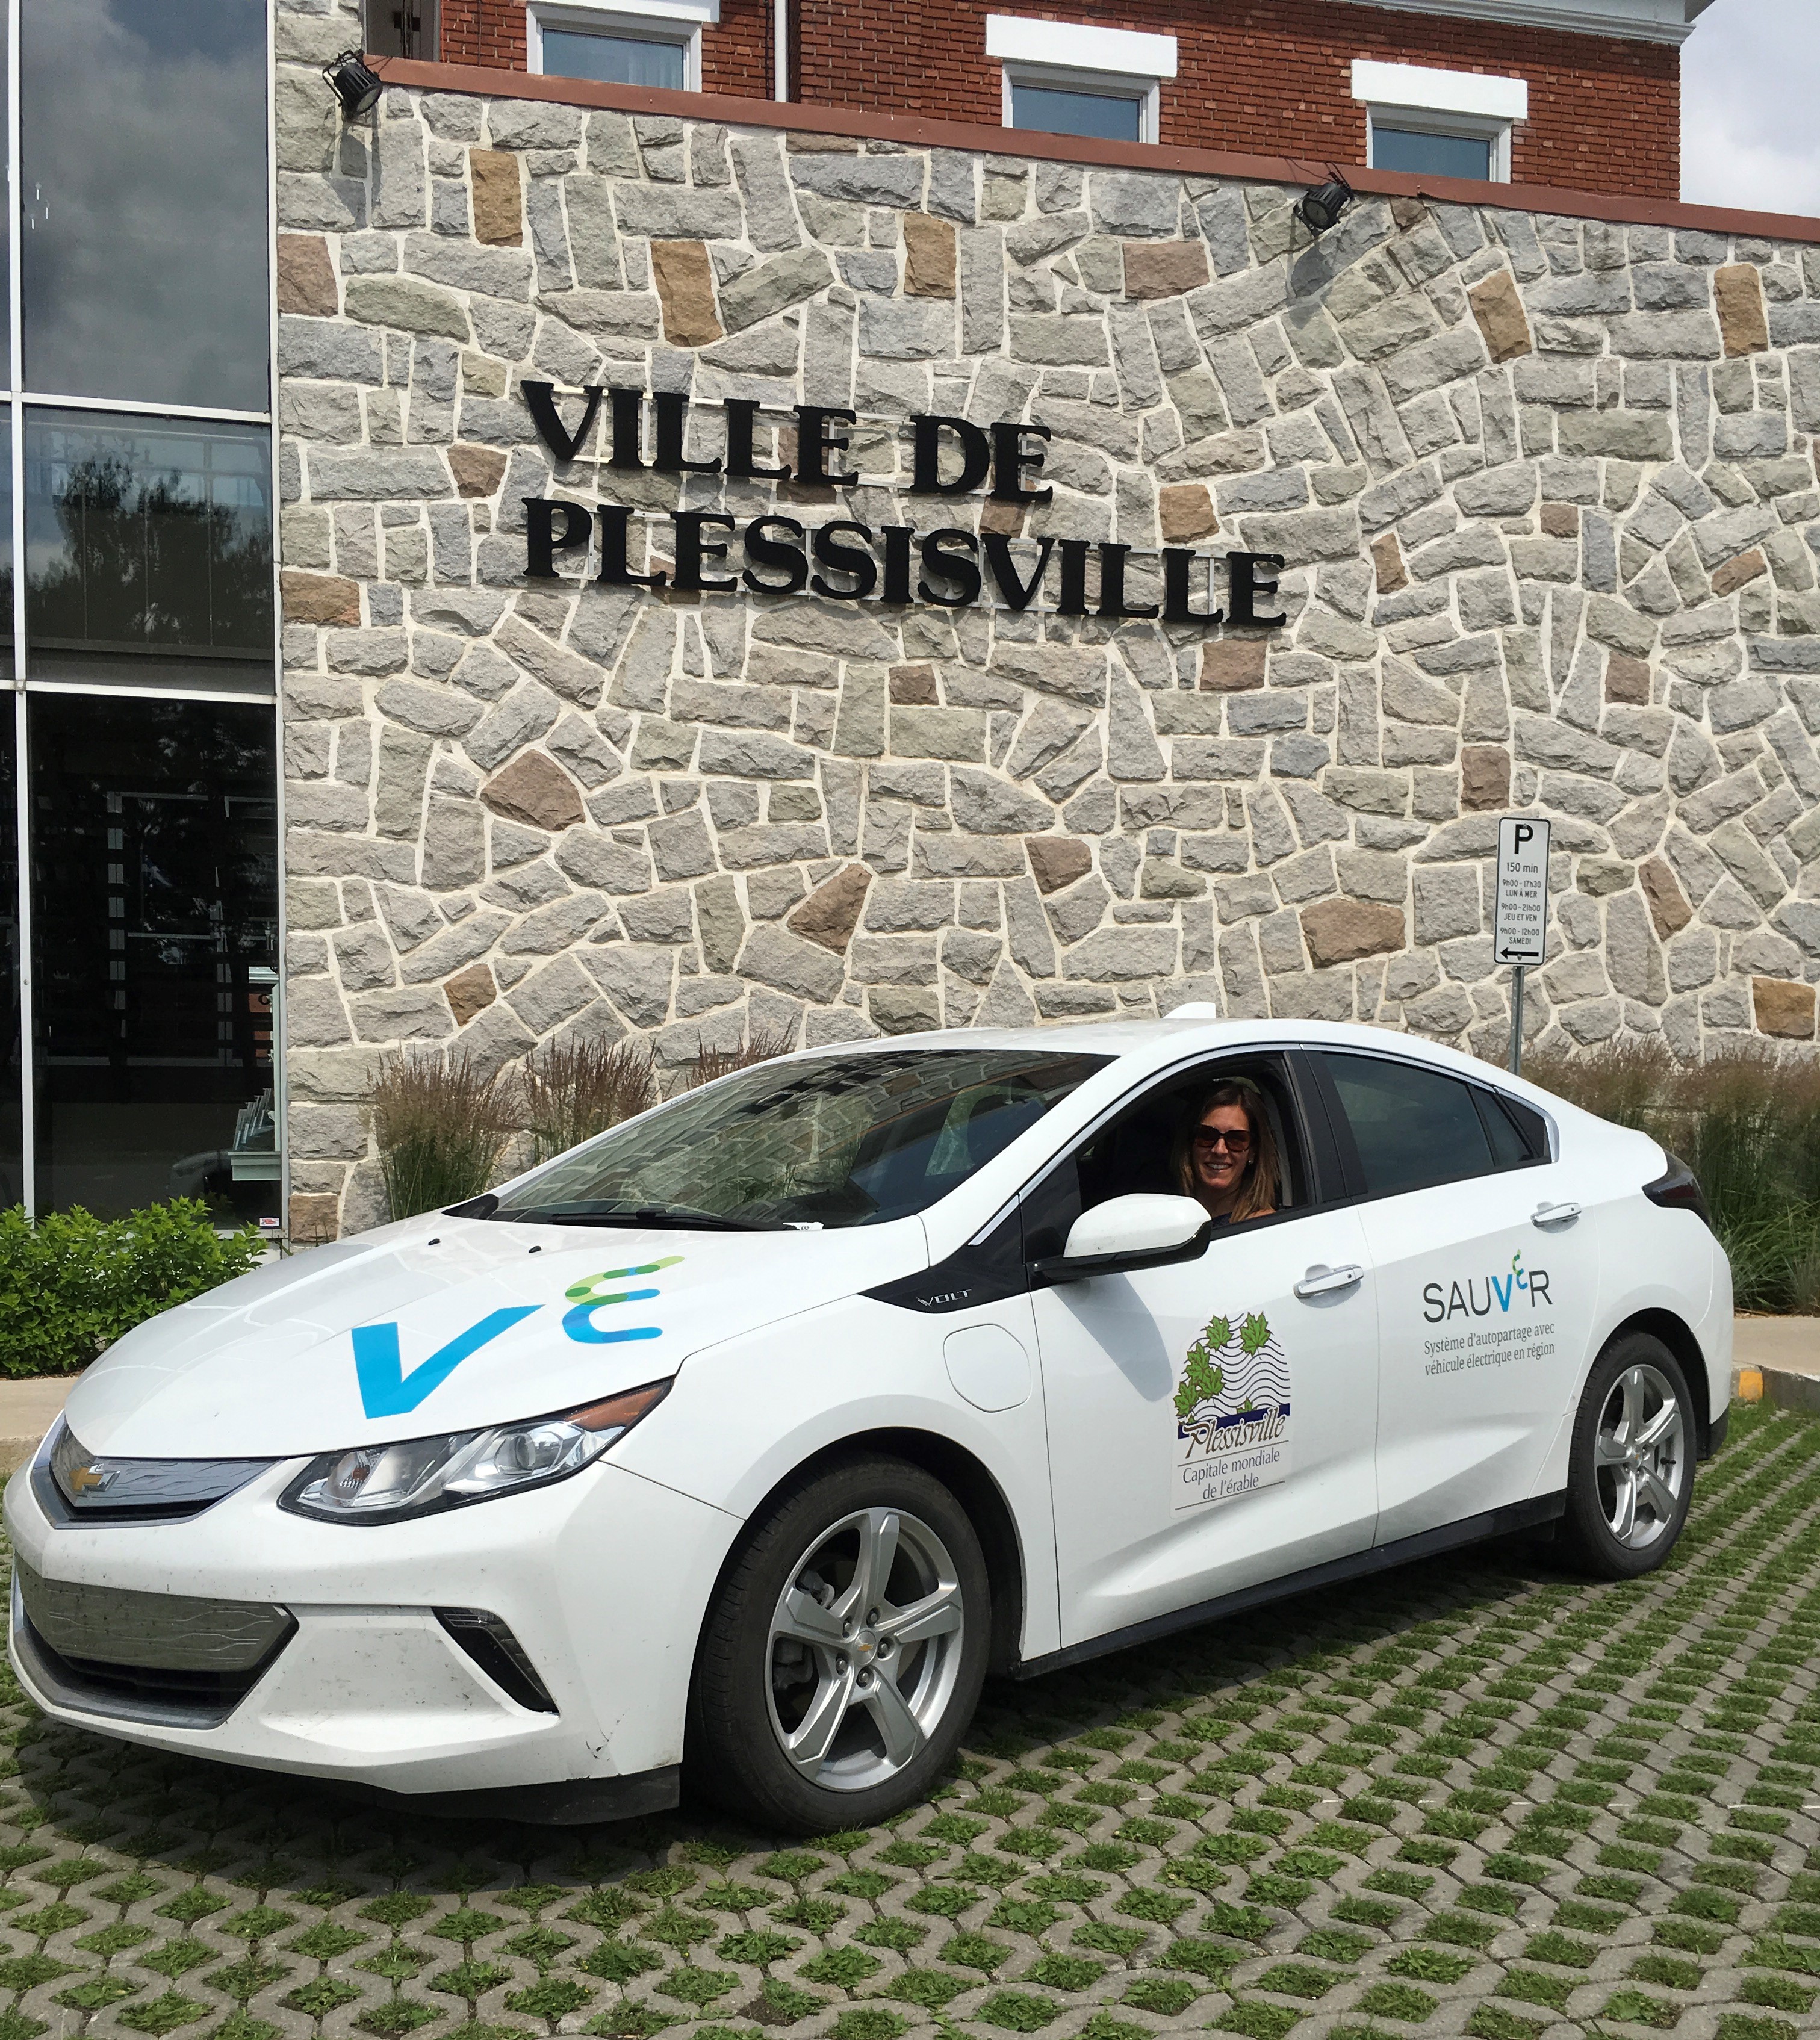 A Plessisville resident smiling, sitting in one of the new electric vehicles